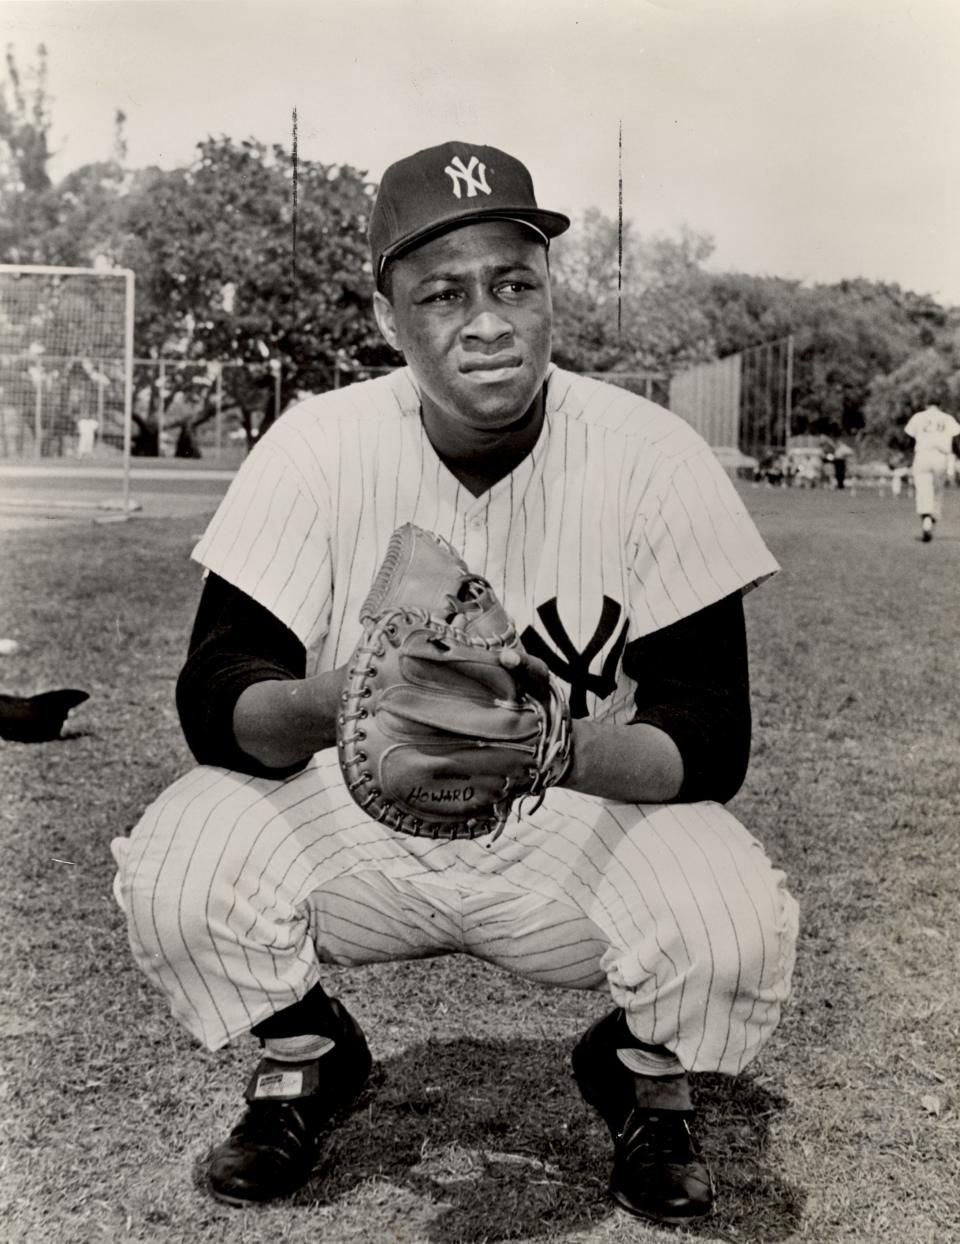 Elston Howard, a New York Yankees player and coach who had his number retired.